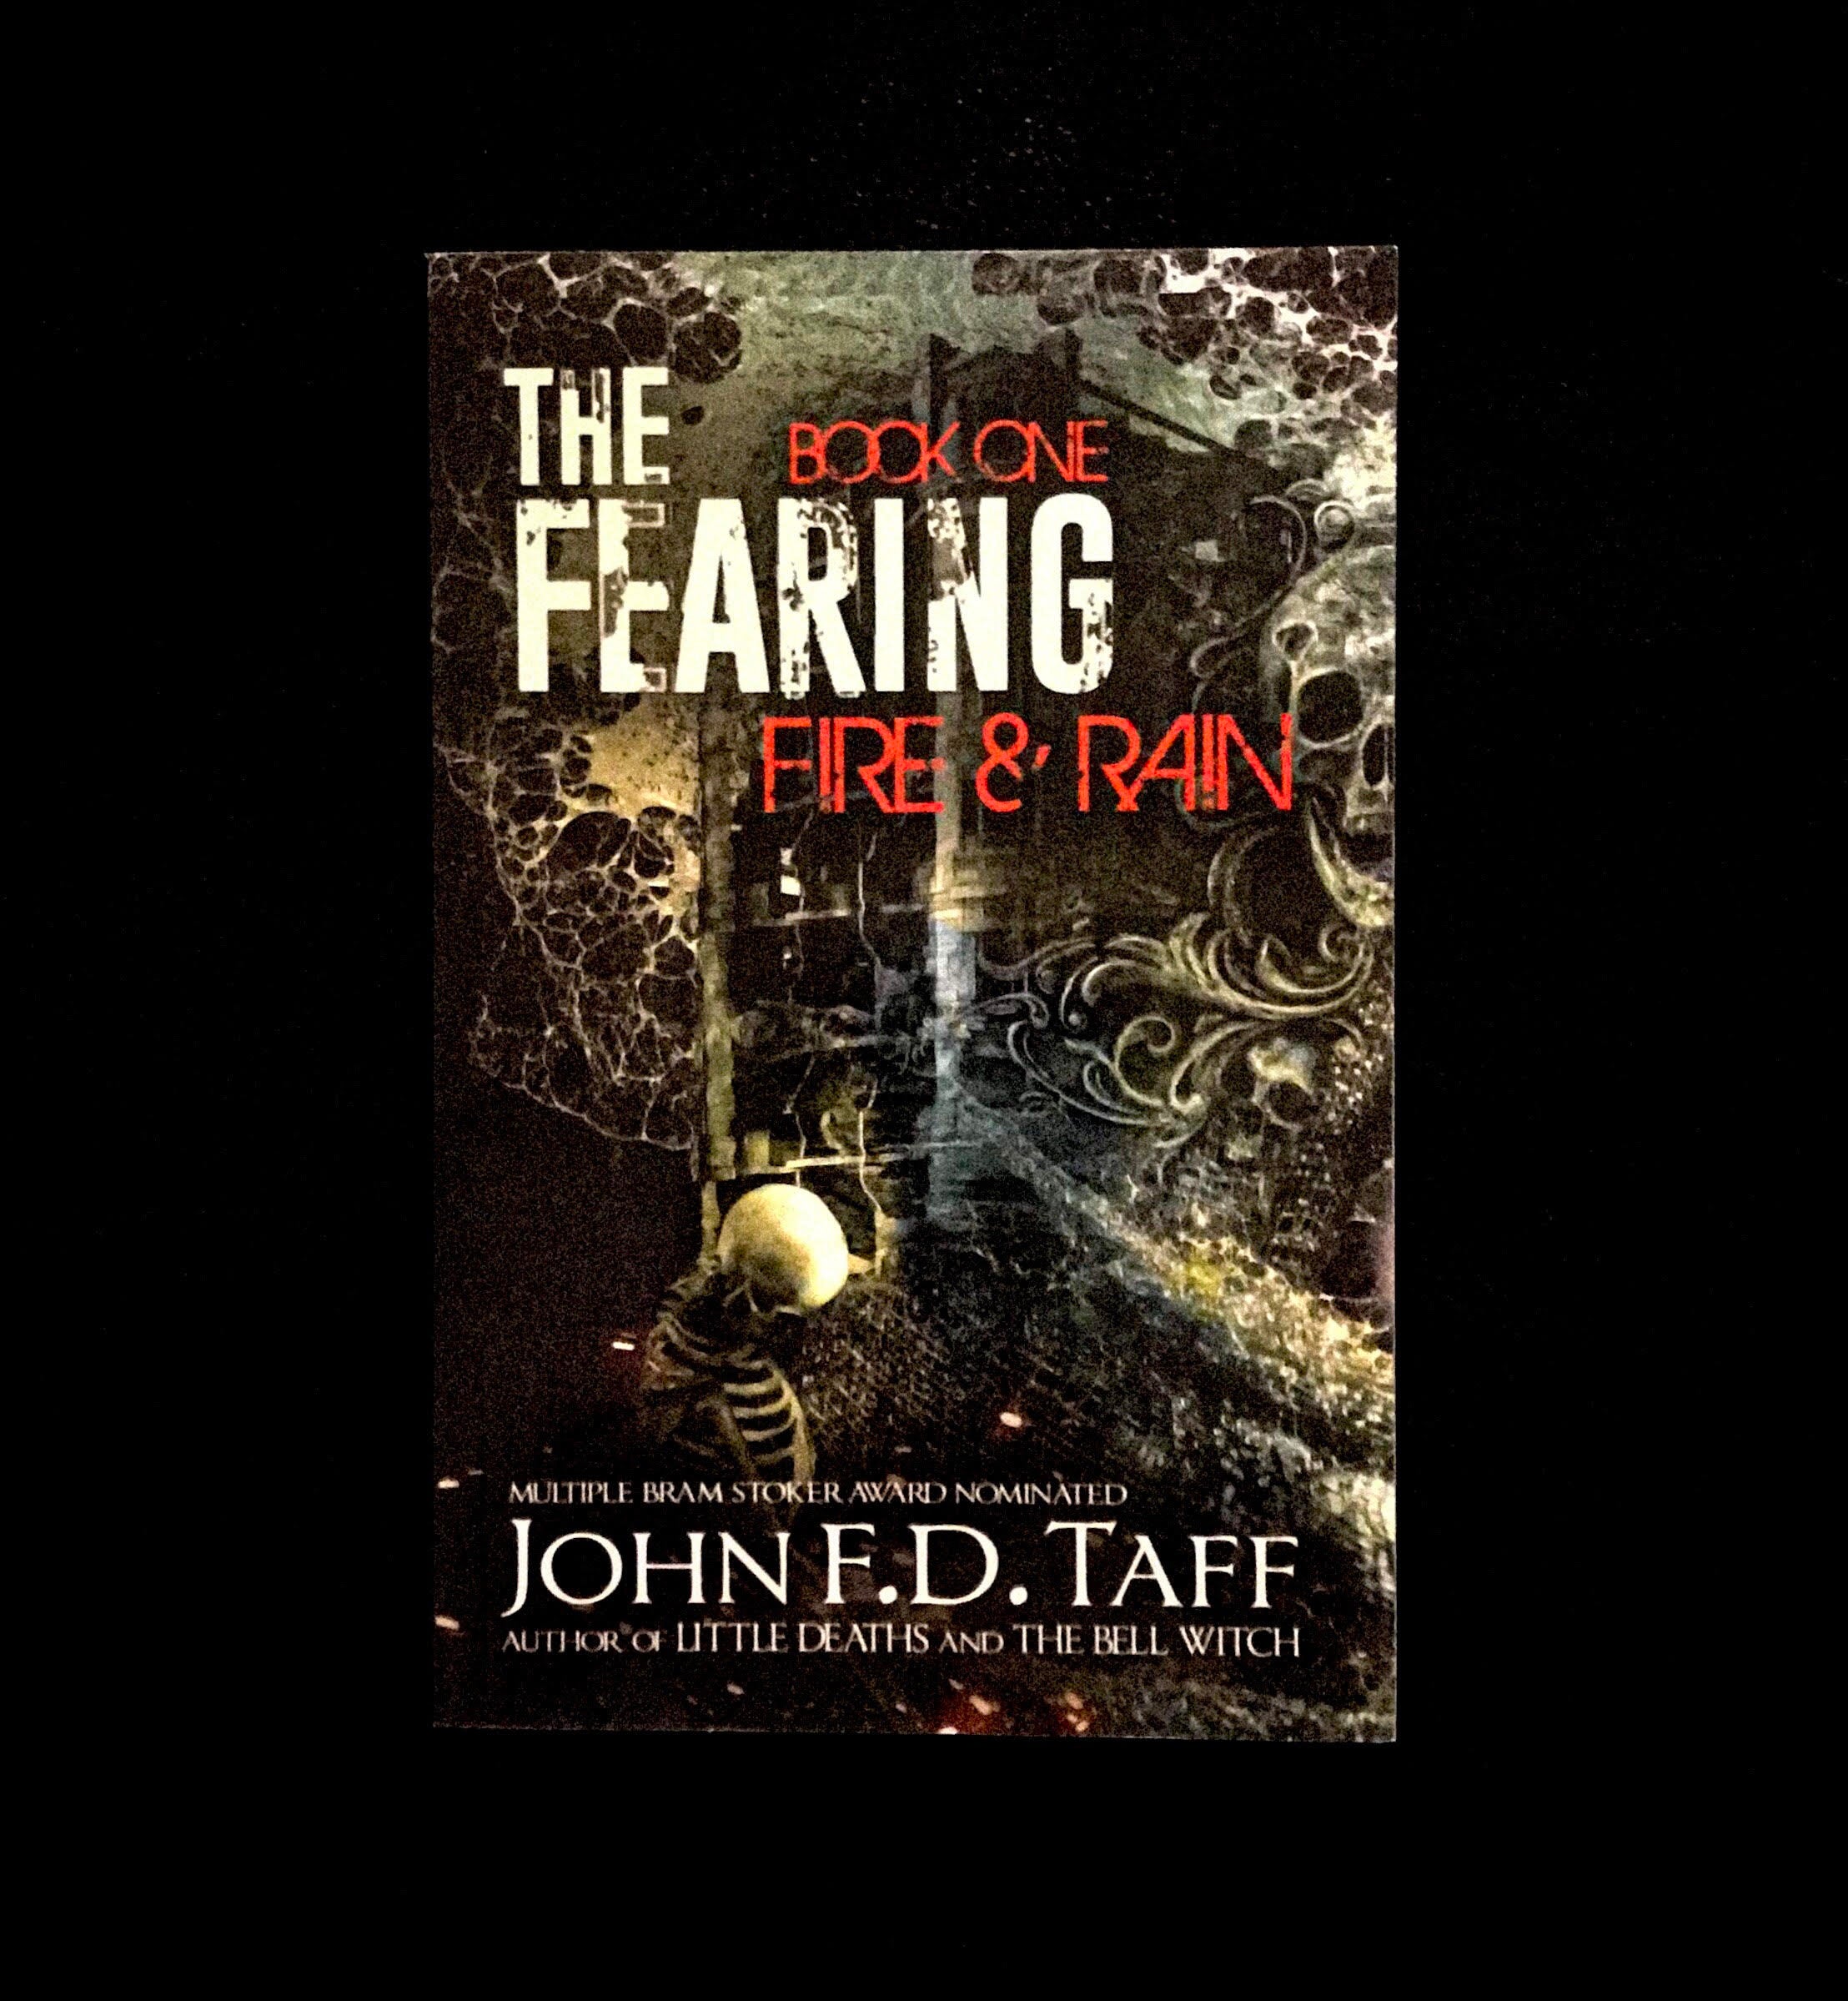 John's Review : The Fearing by John F. D. Taff